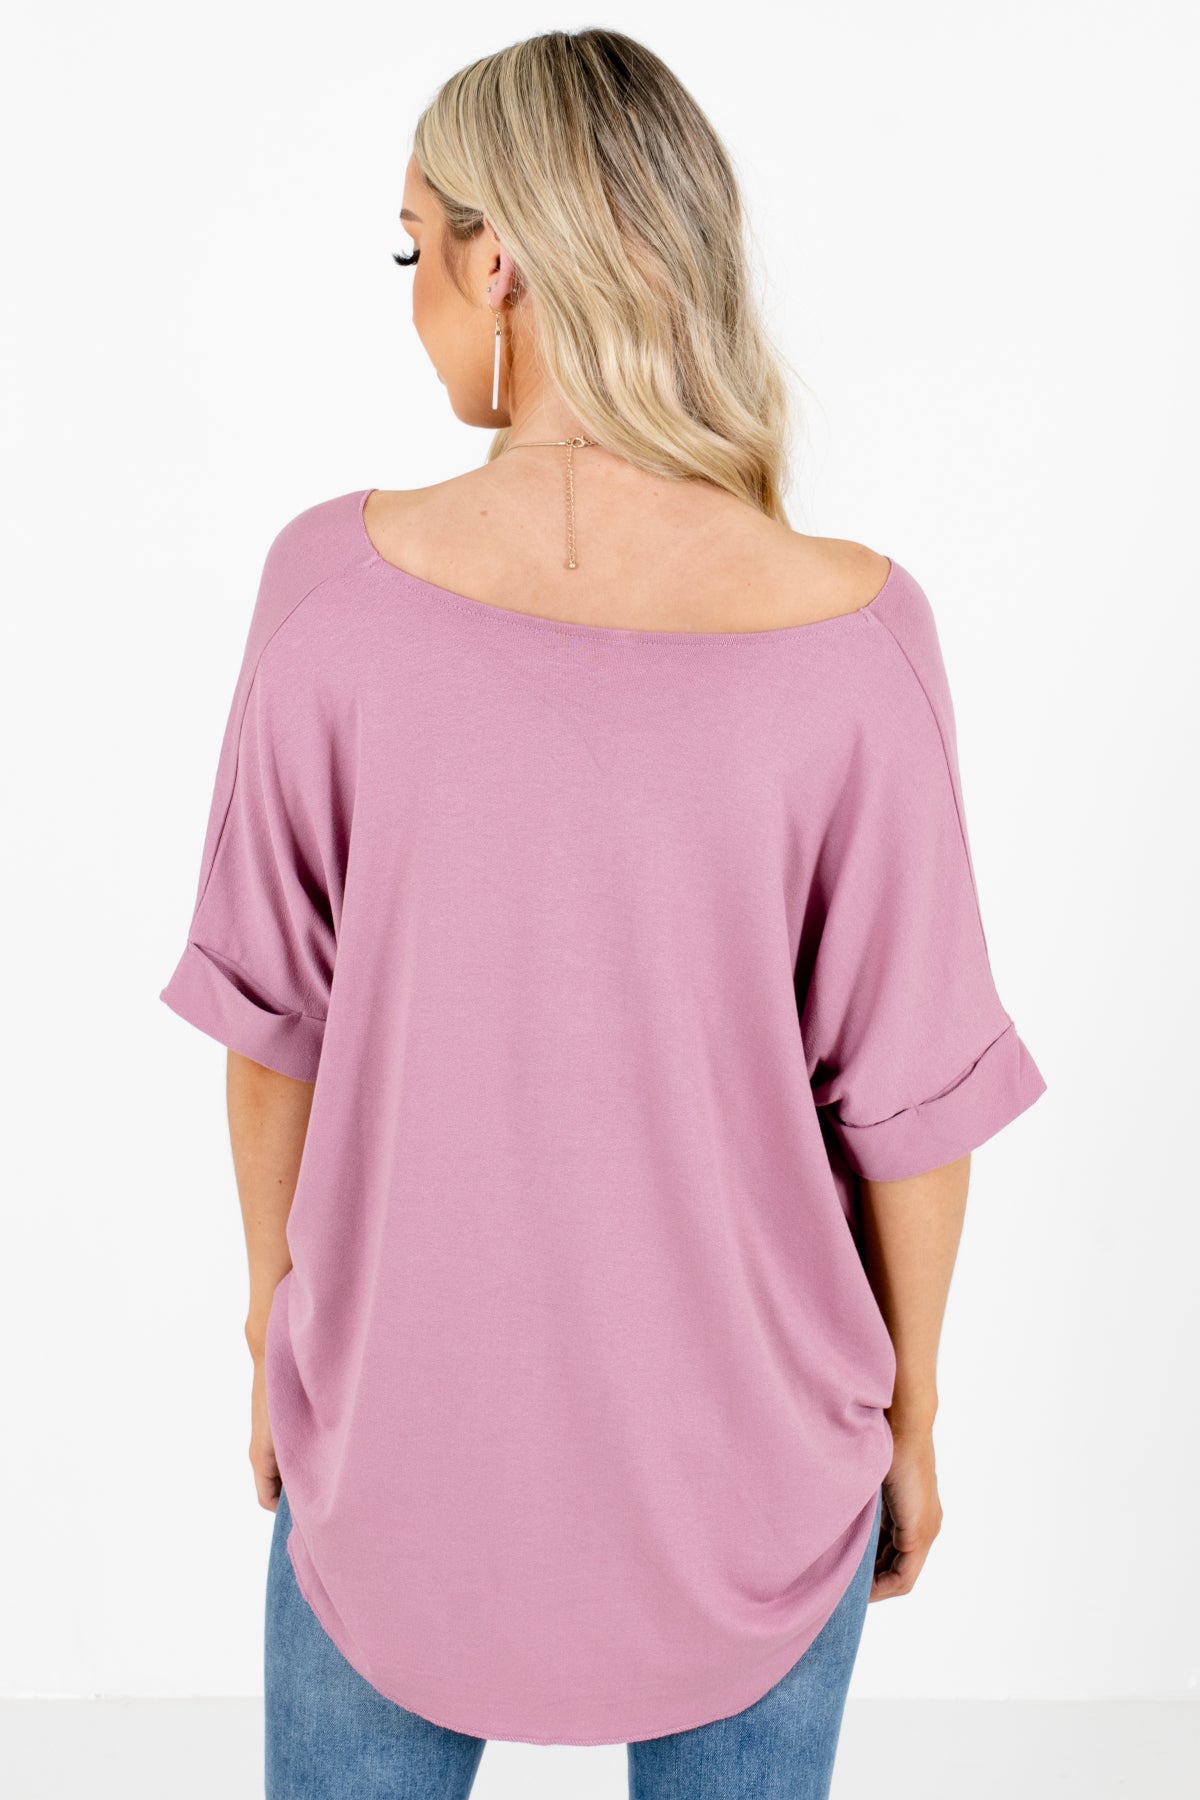 Women's Pink Casual Everyday Boutique Blouse